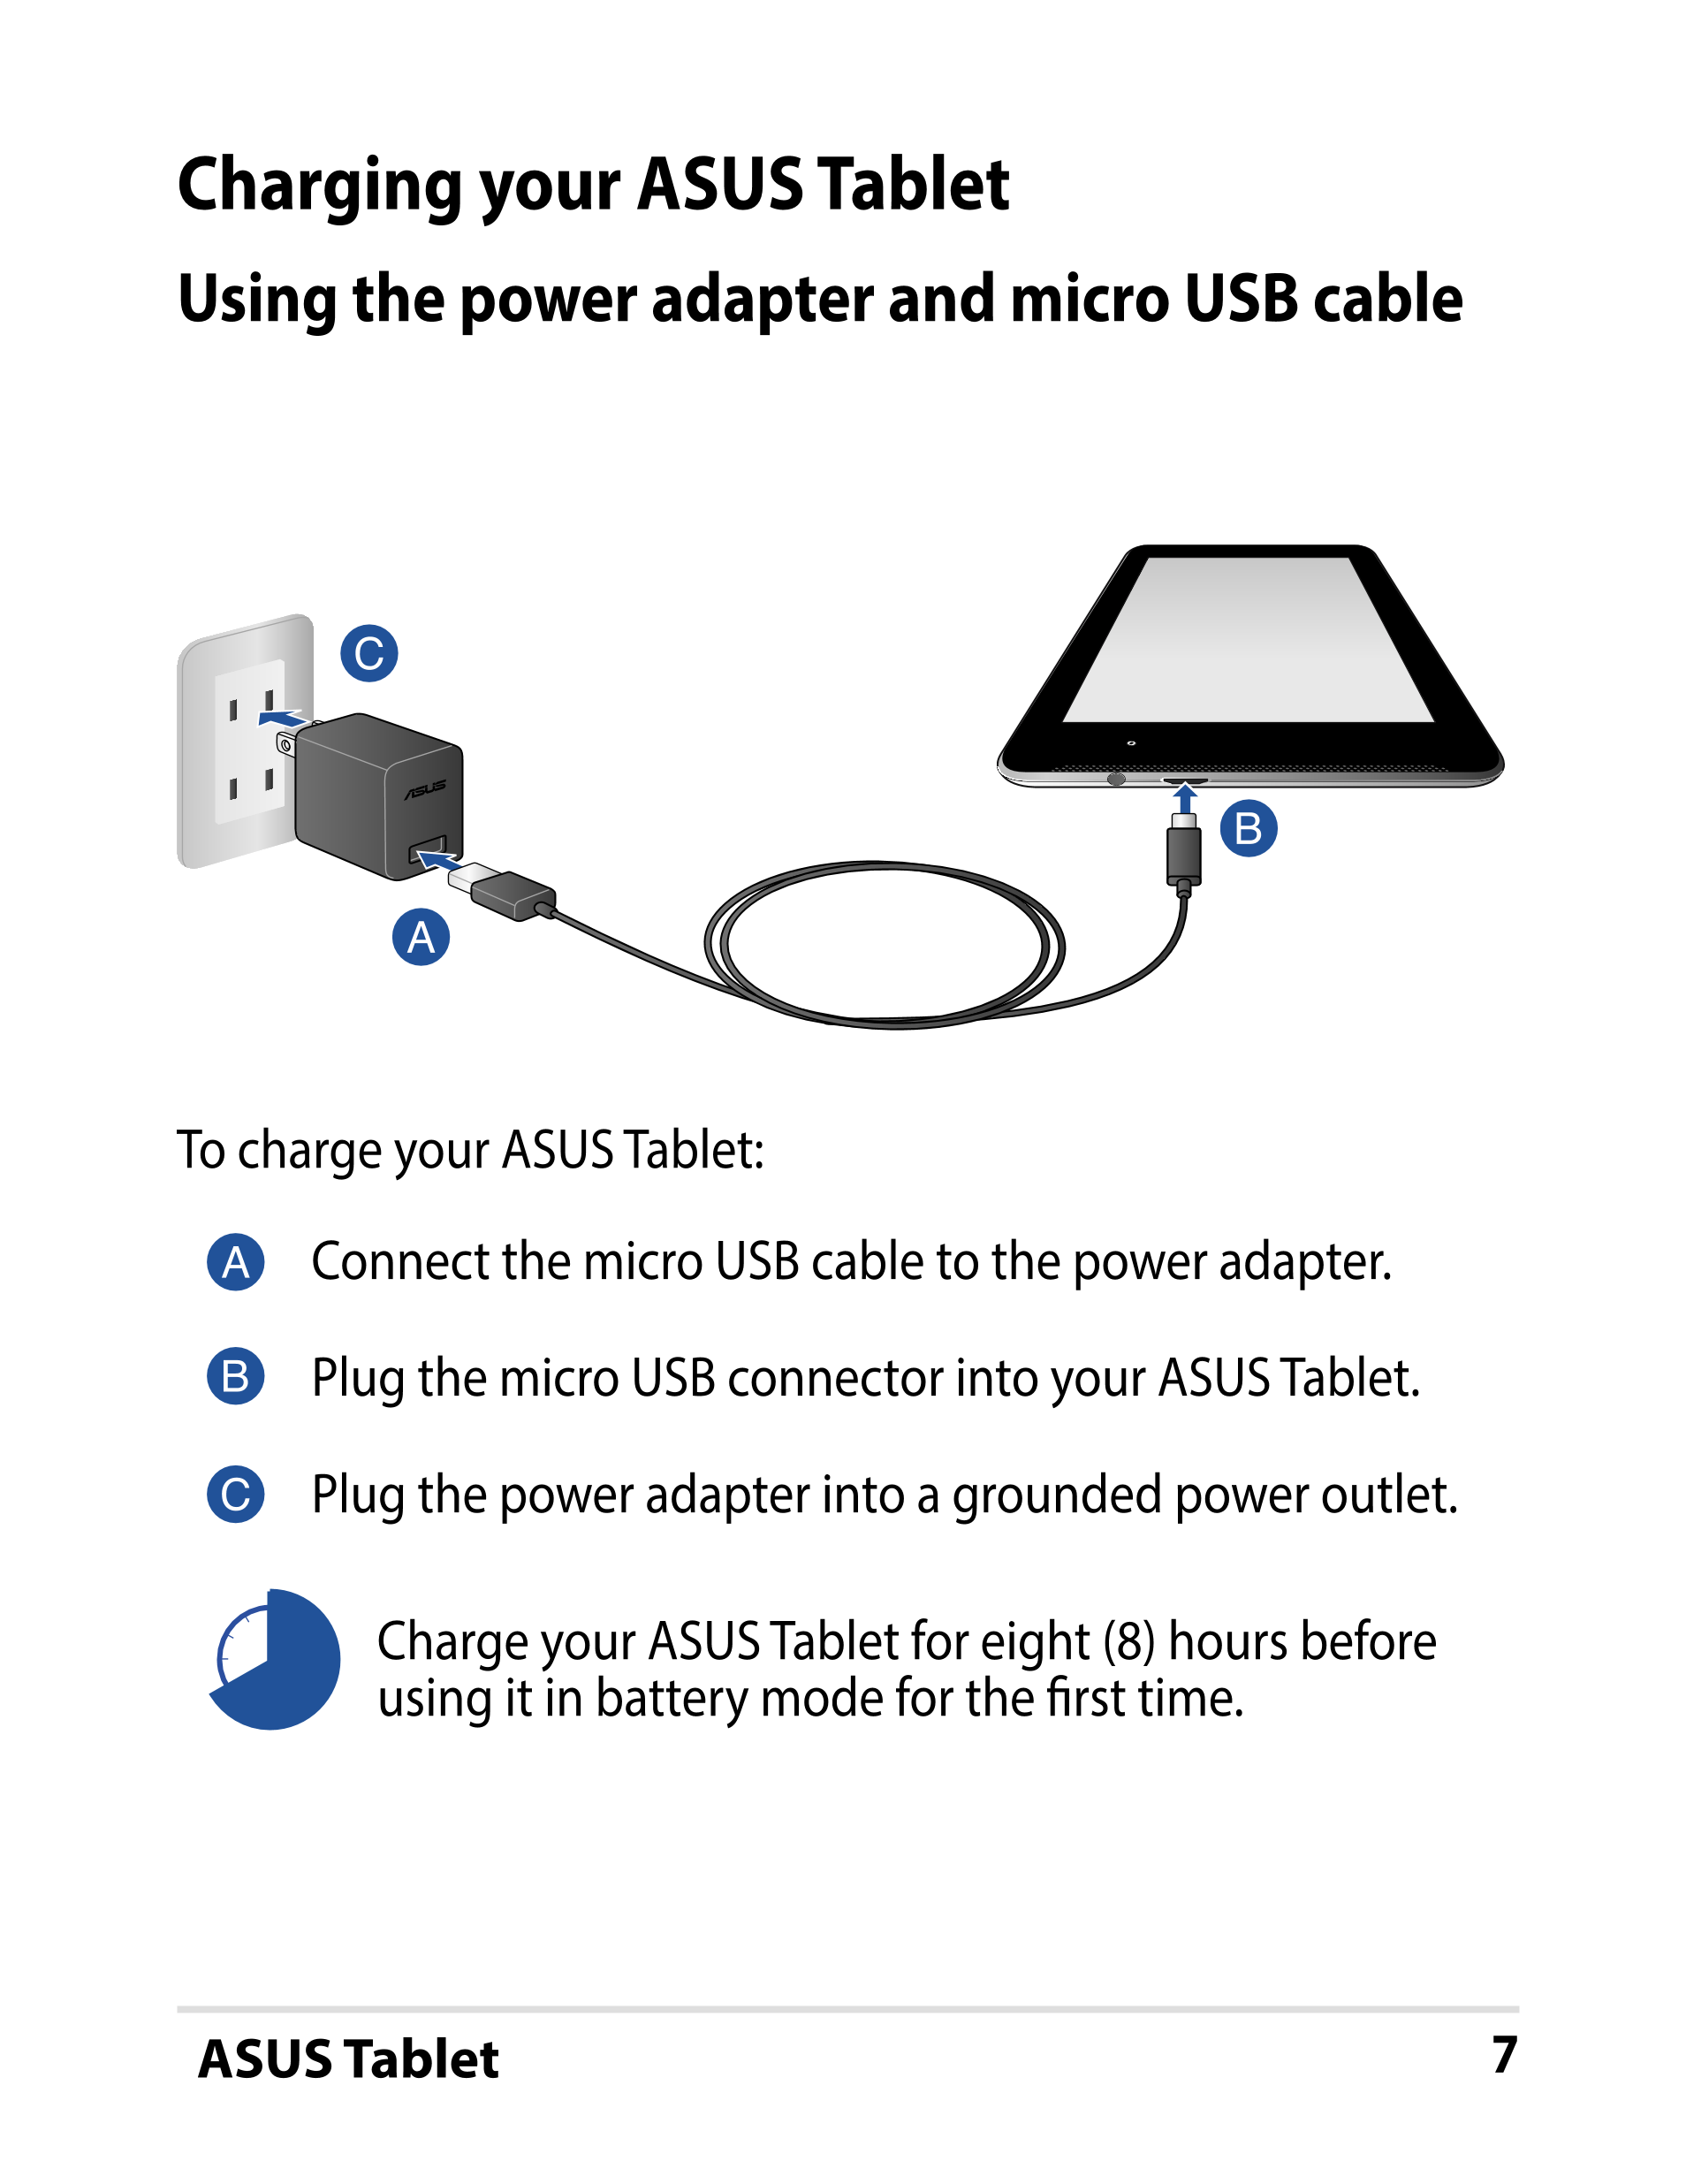 Charging your ASUS Tablet
Using the power adapter and micro USB cable
To charge your ASUS Tablet:
Connect the micro USB cable to